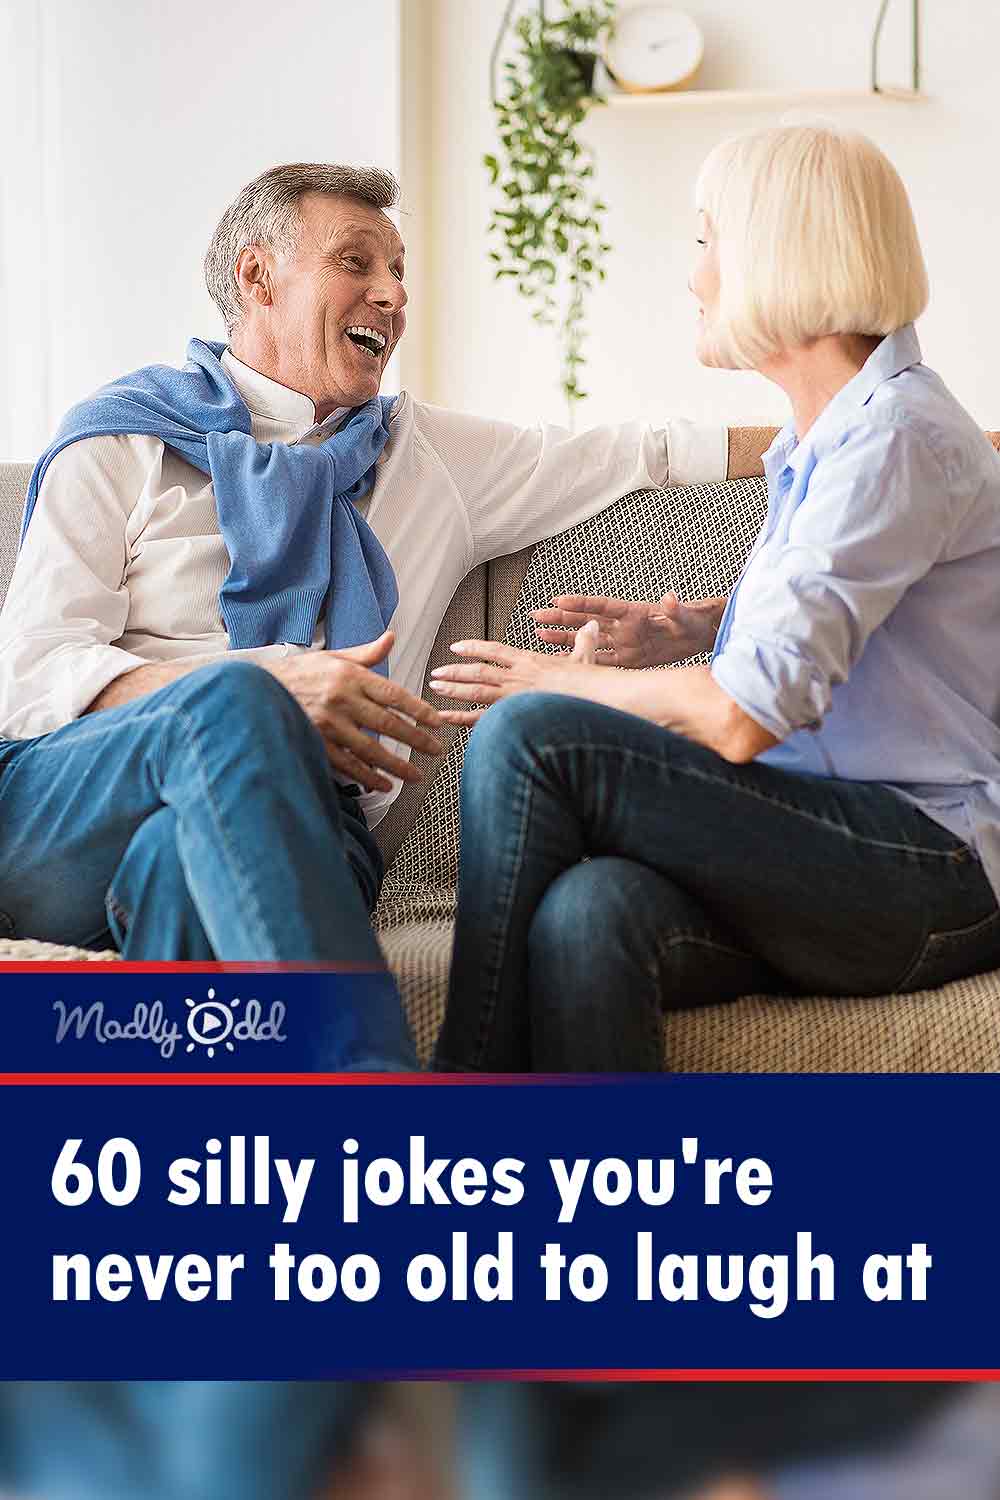 60 silly jokes you\'re never too old to laugh at